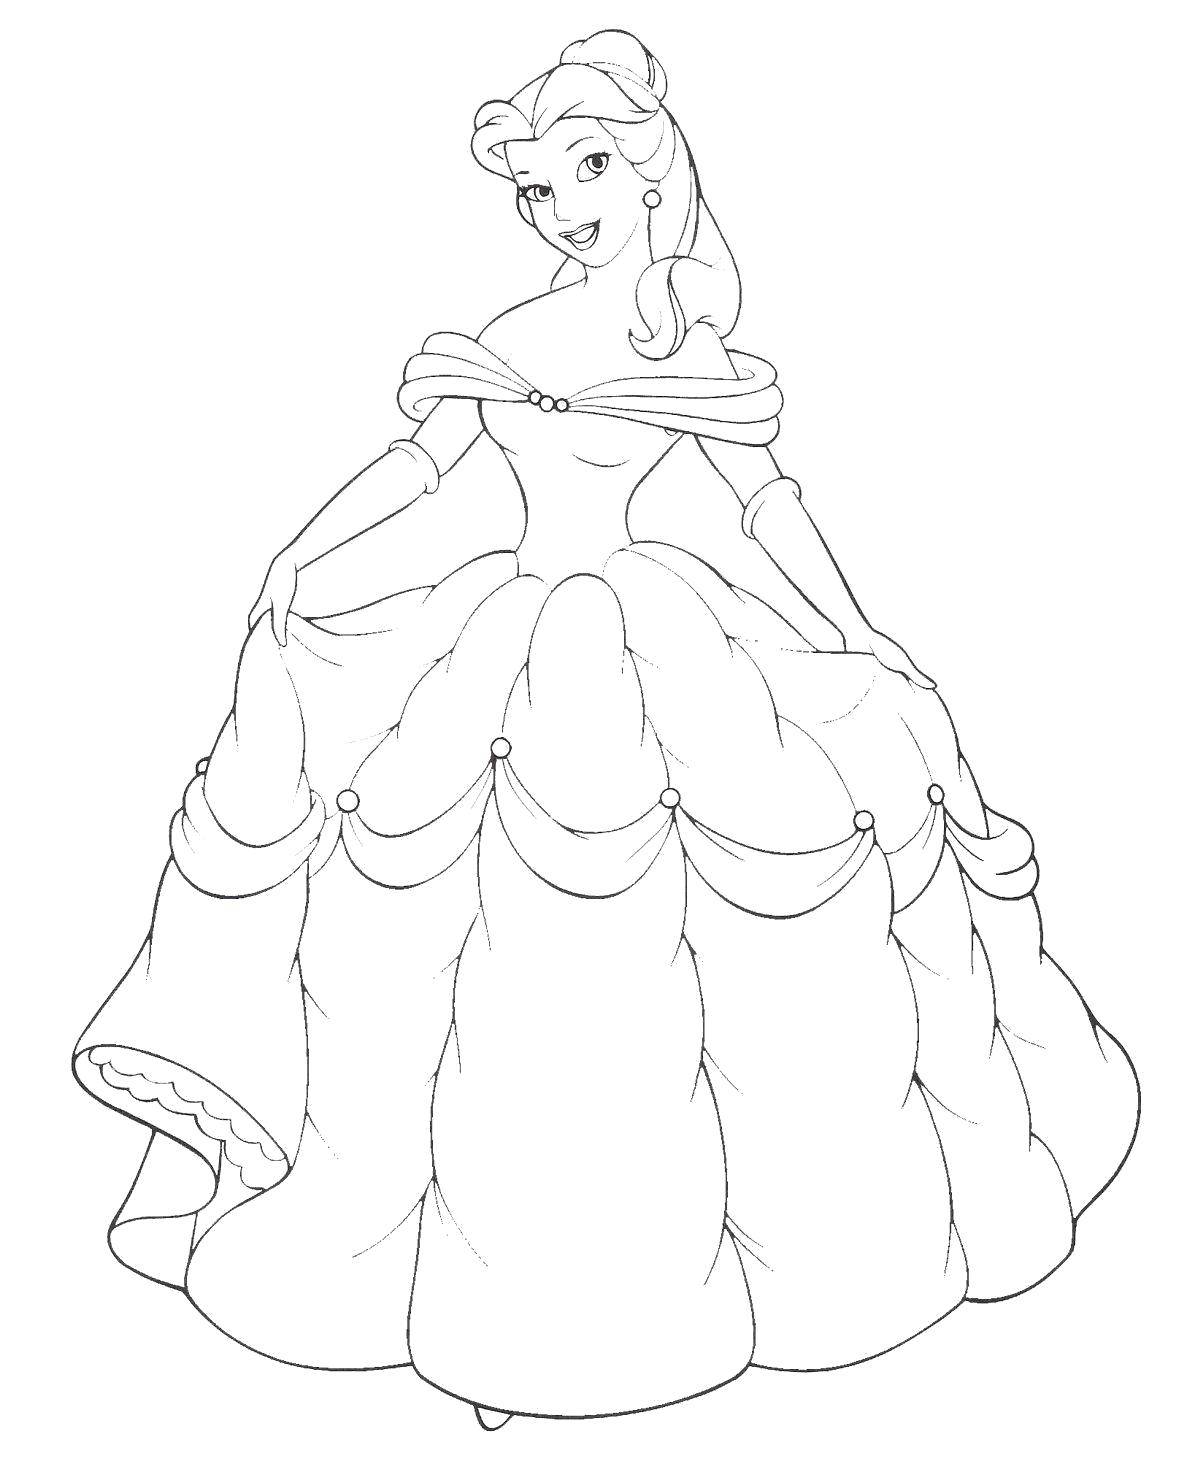 Coloring Yellow dress Belle. Category Disney cartoons. Tags:  Beauty and the Beast, Disney.